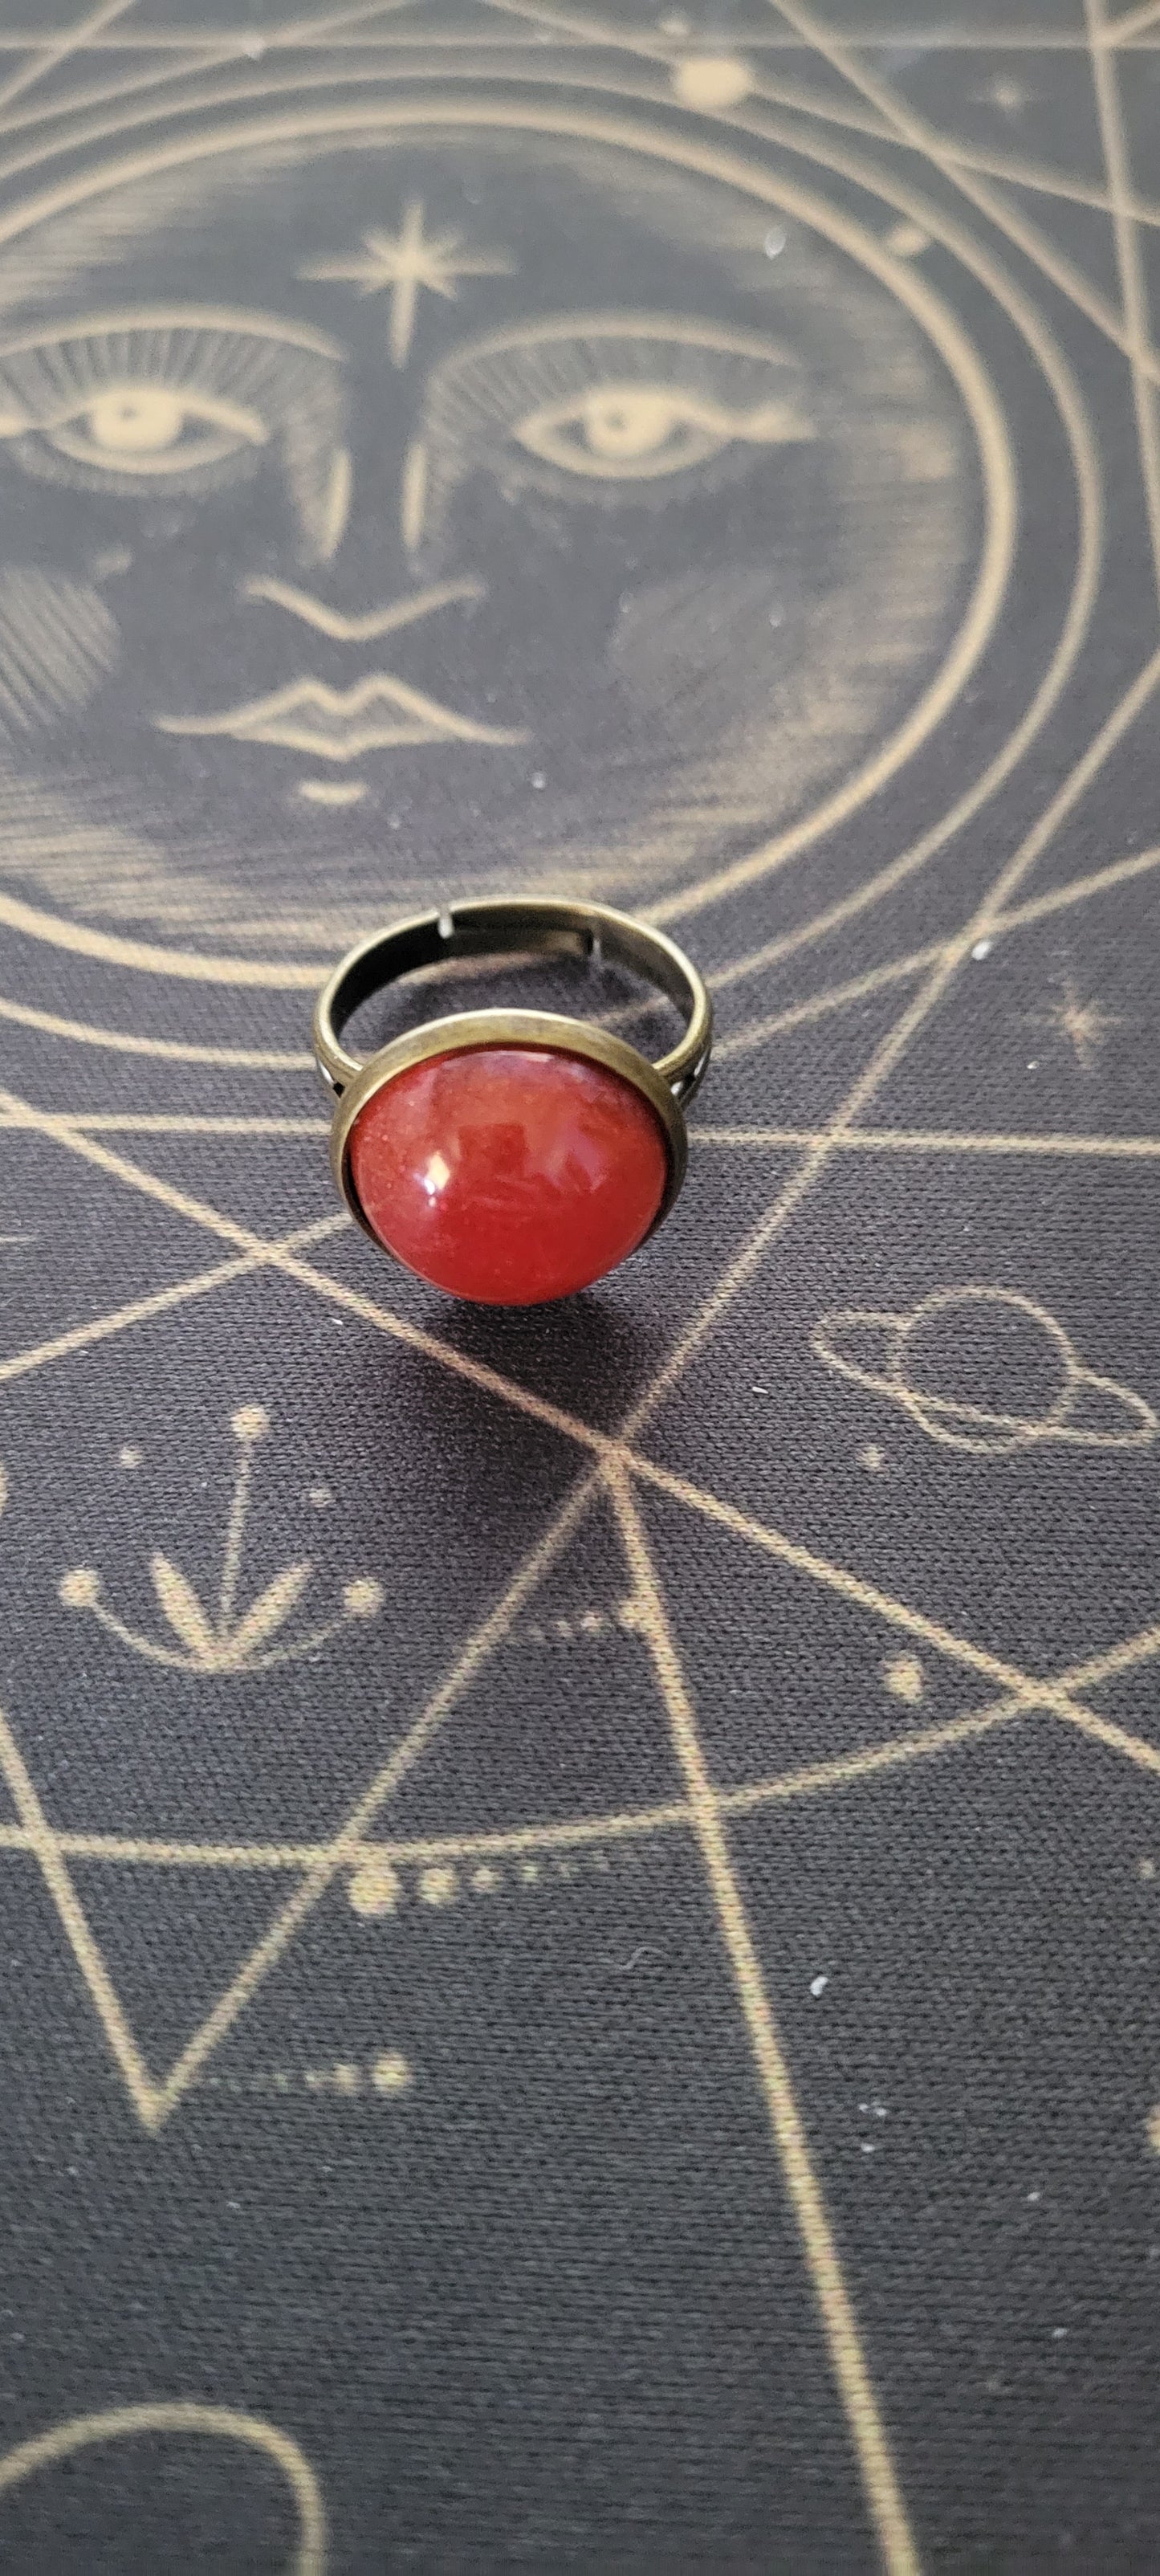 Small Round Ring